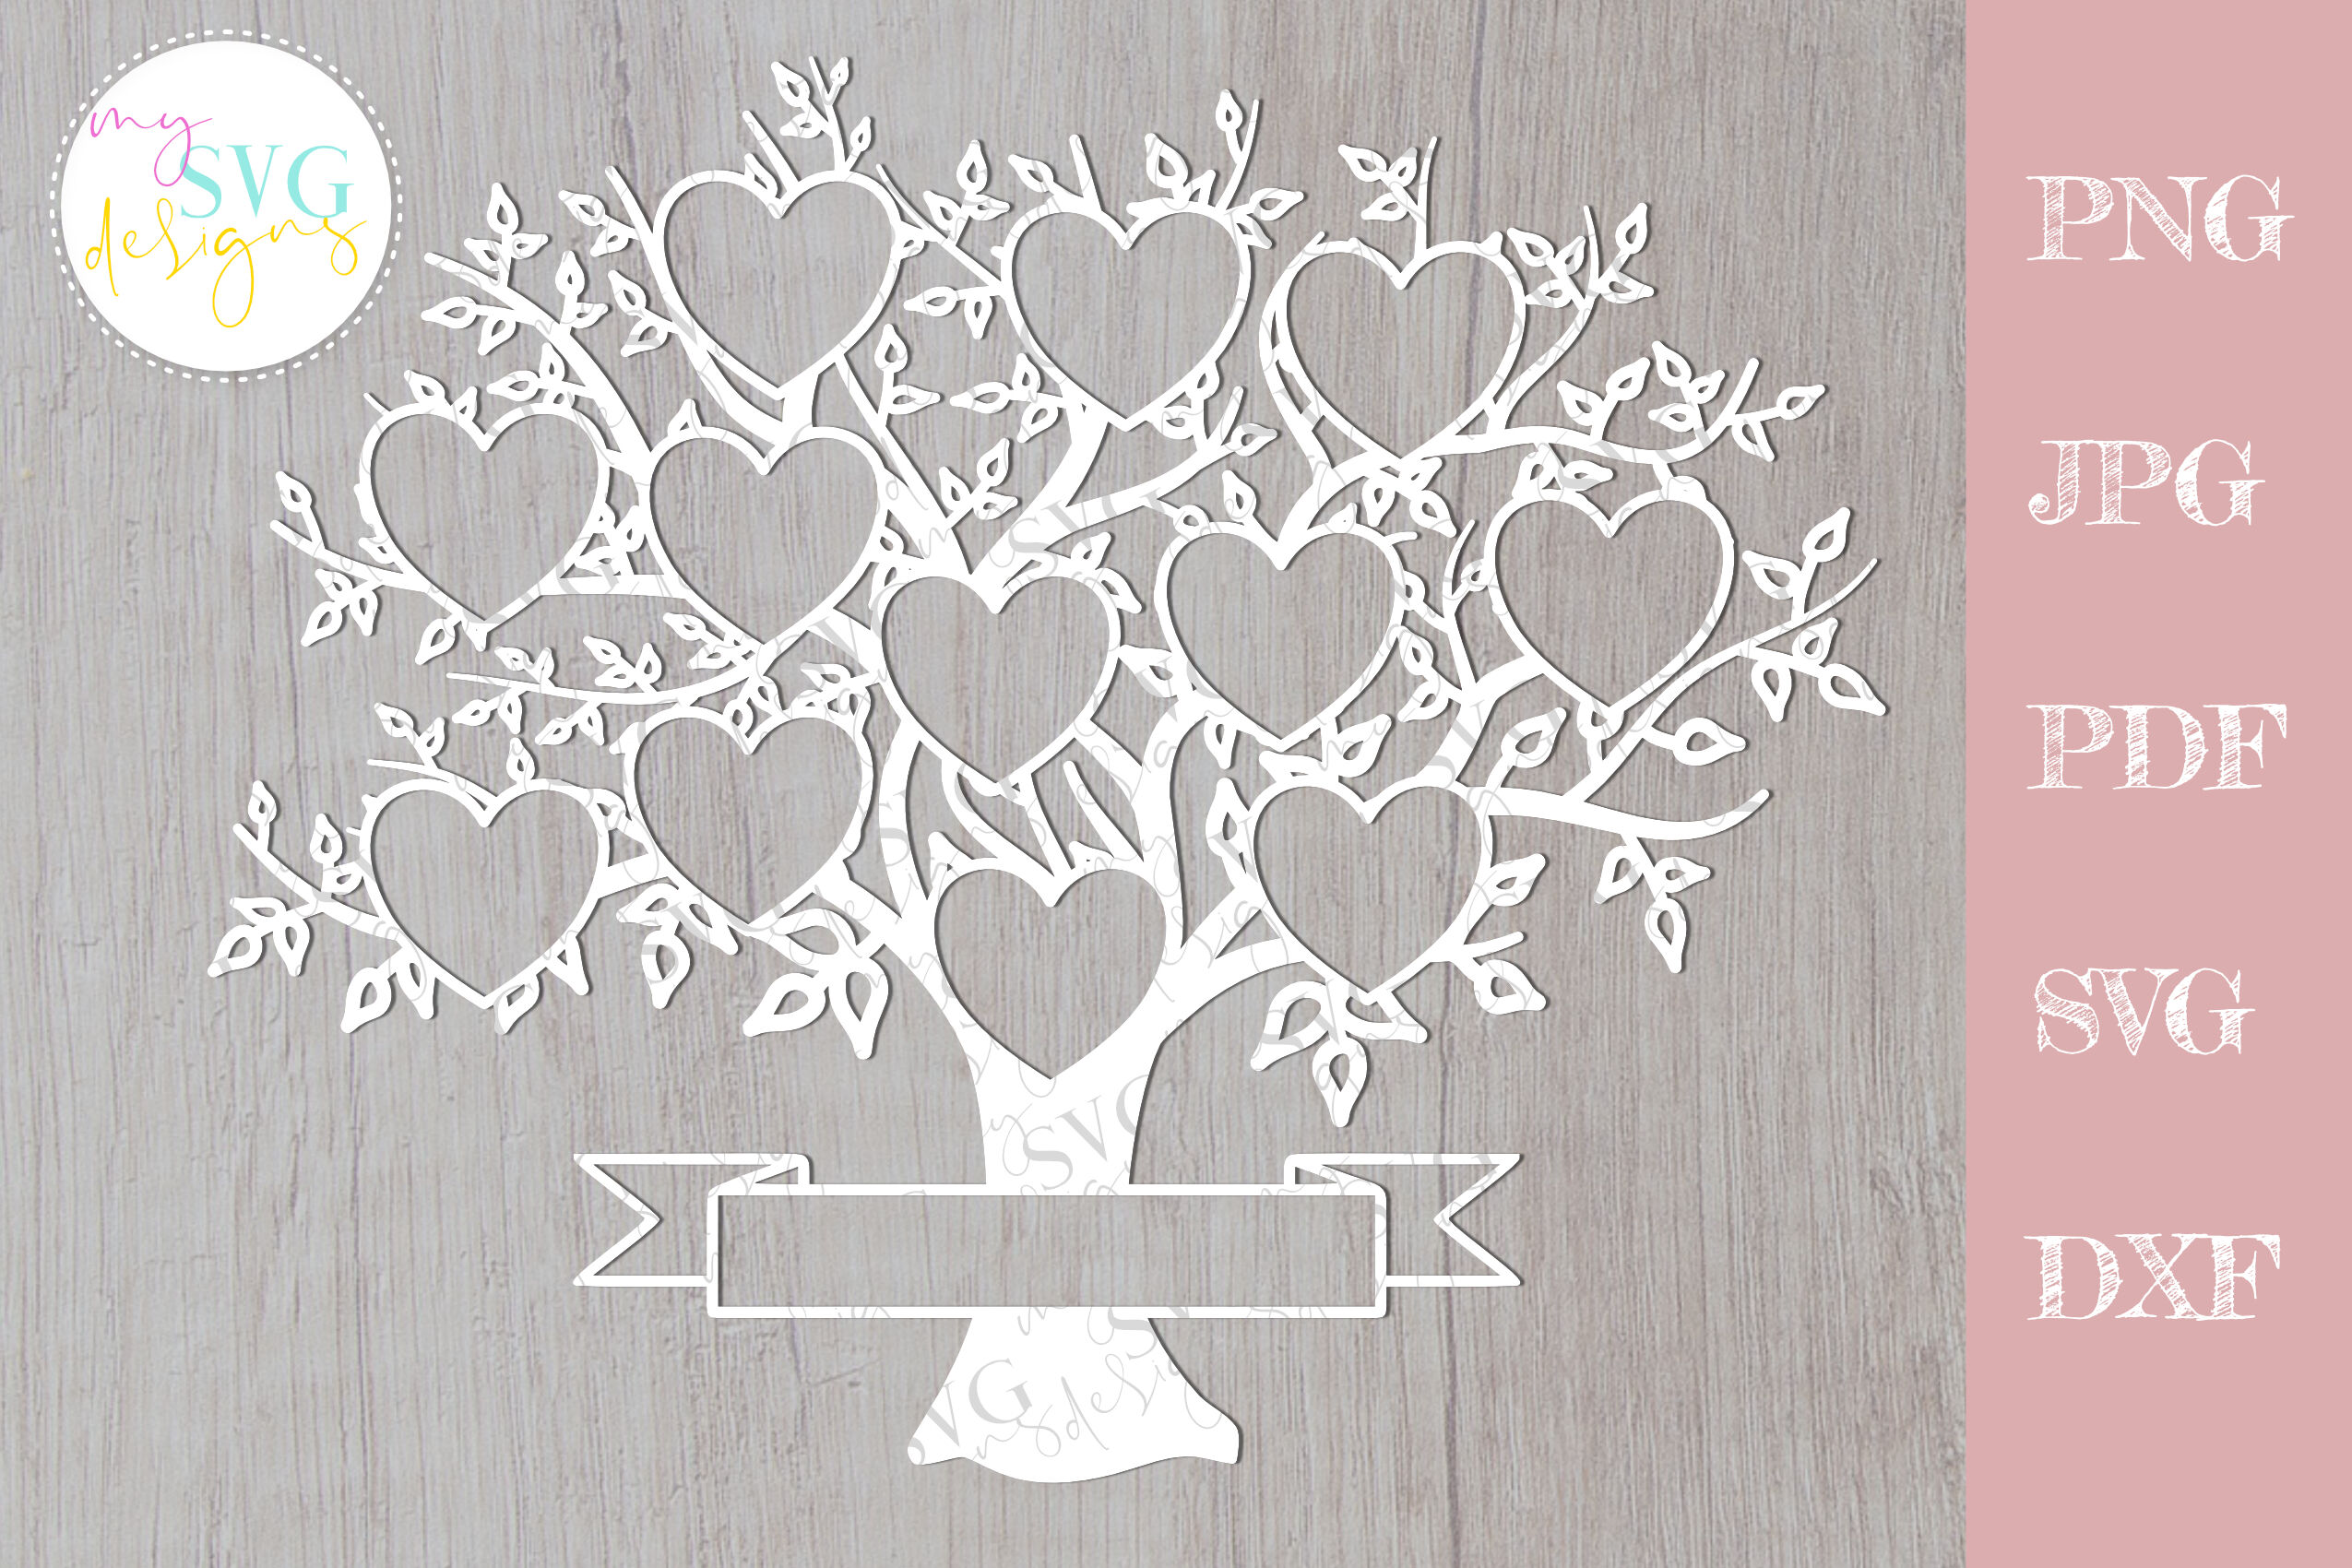 Download Family Tree Svg 12 Members Svg Family Tree Family Reunion Svg By Mysvgdesigns Thehungryjpeg Com